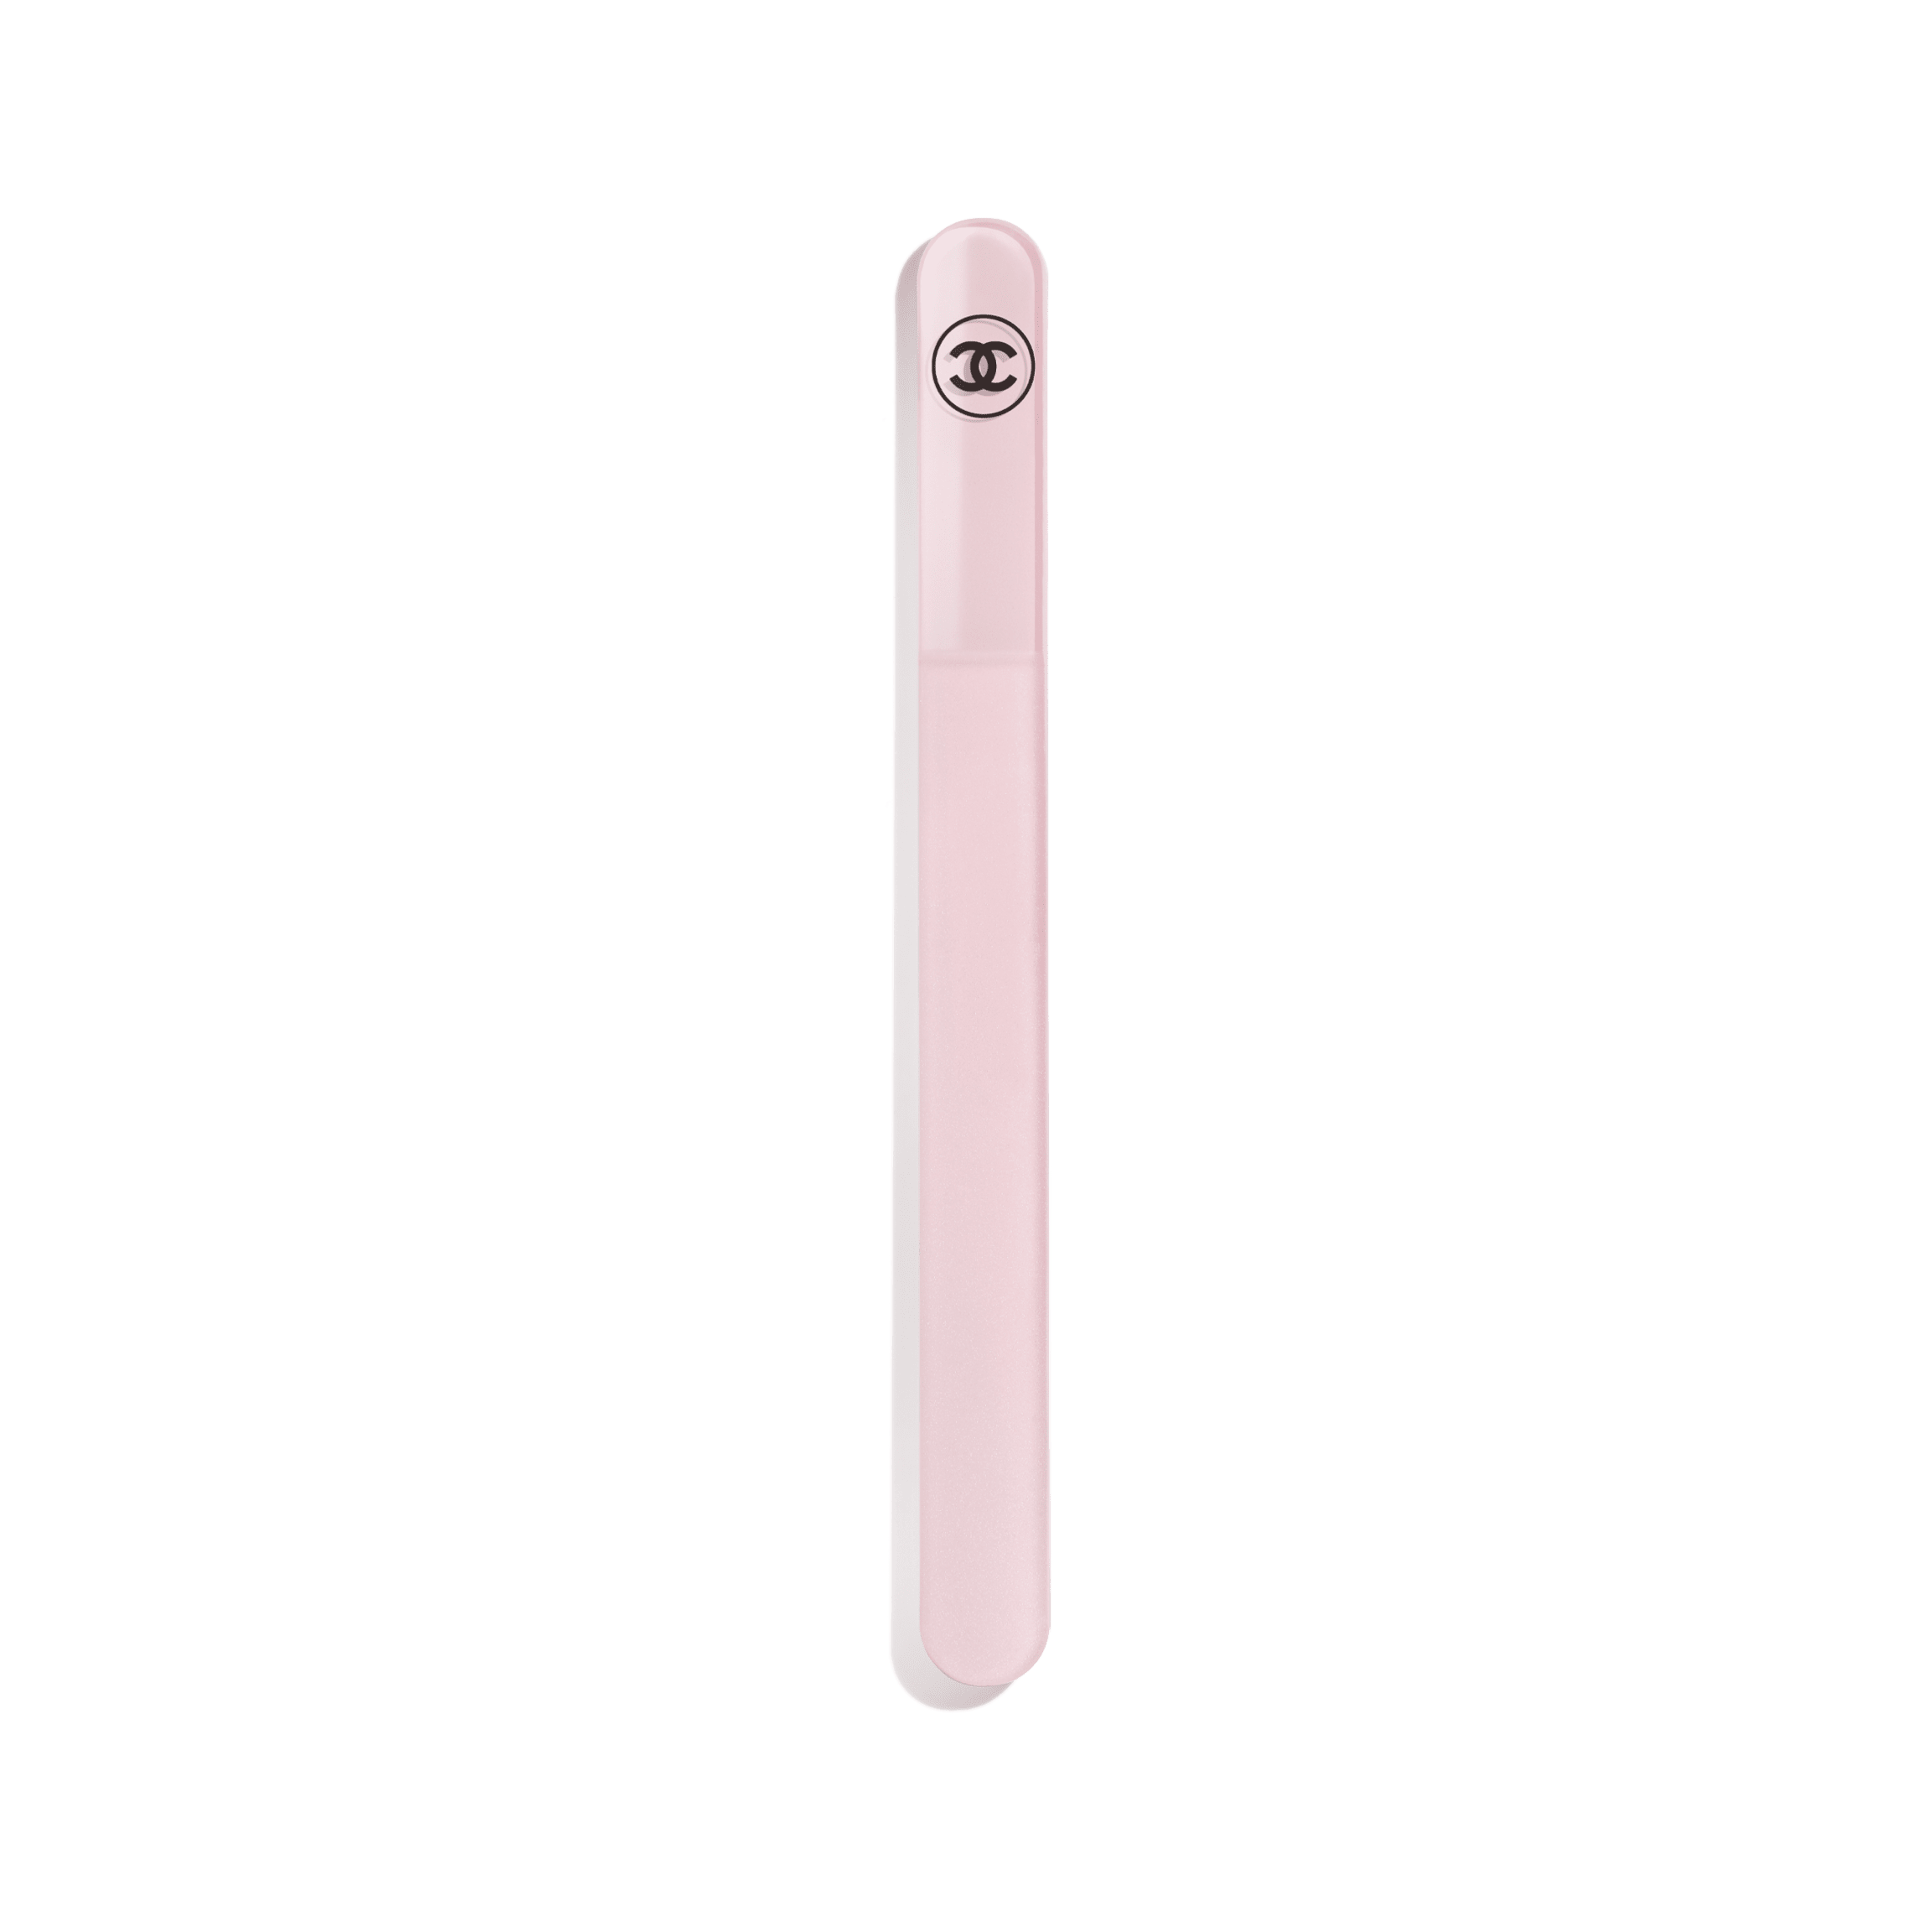 Chanel Codes Couleur Limited-Edition Nail File 111 - BALLERINA in 